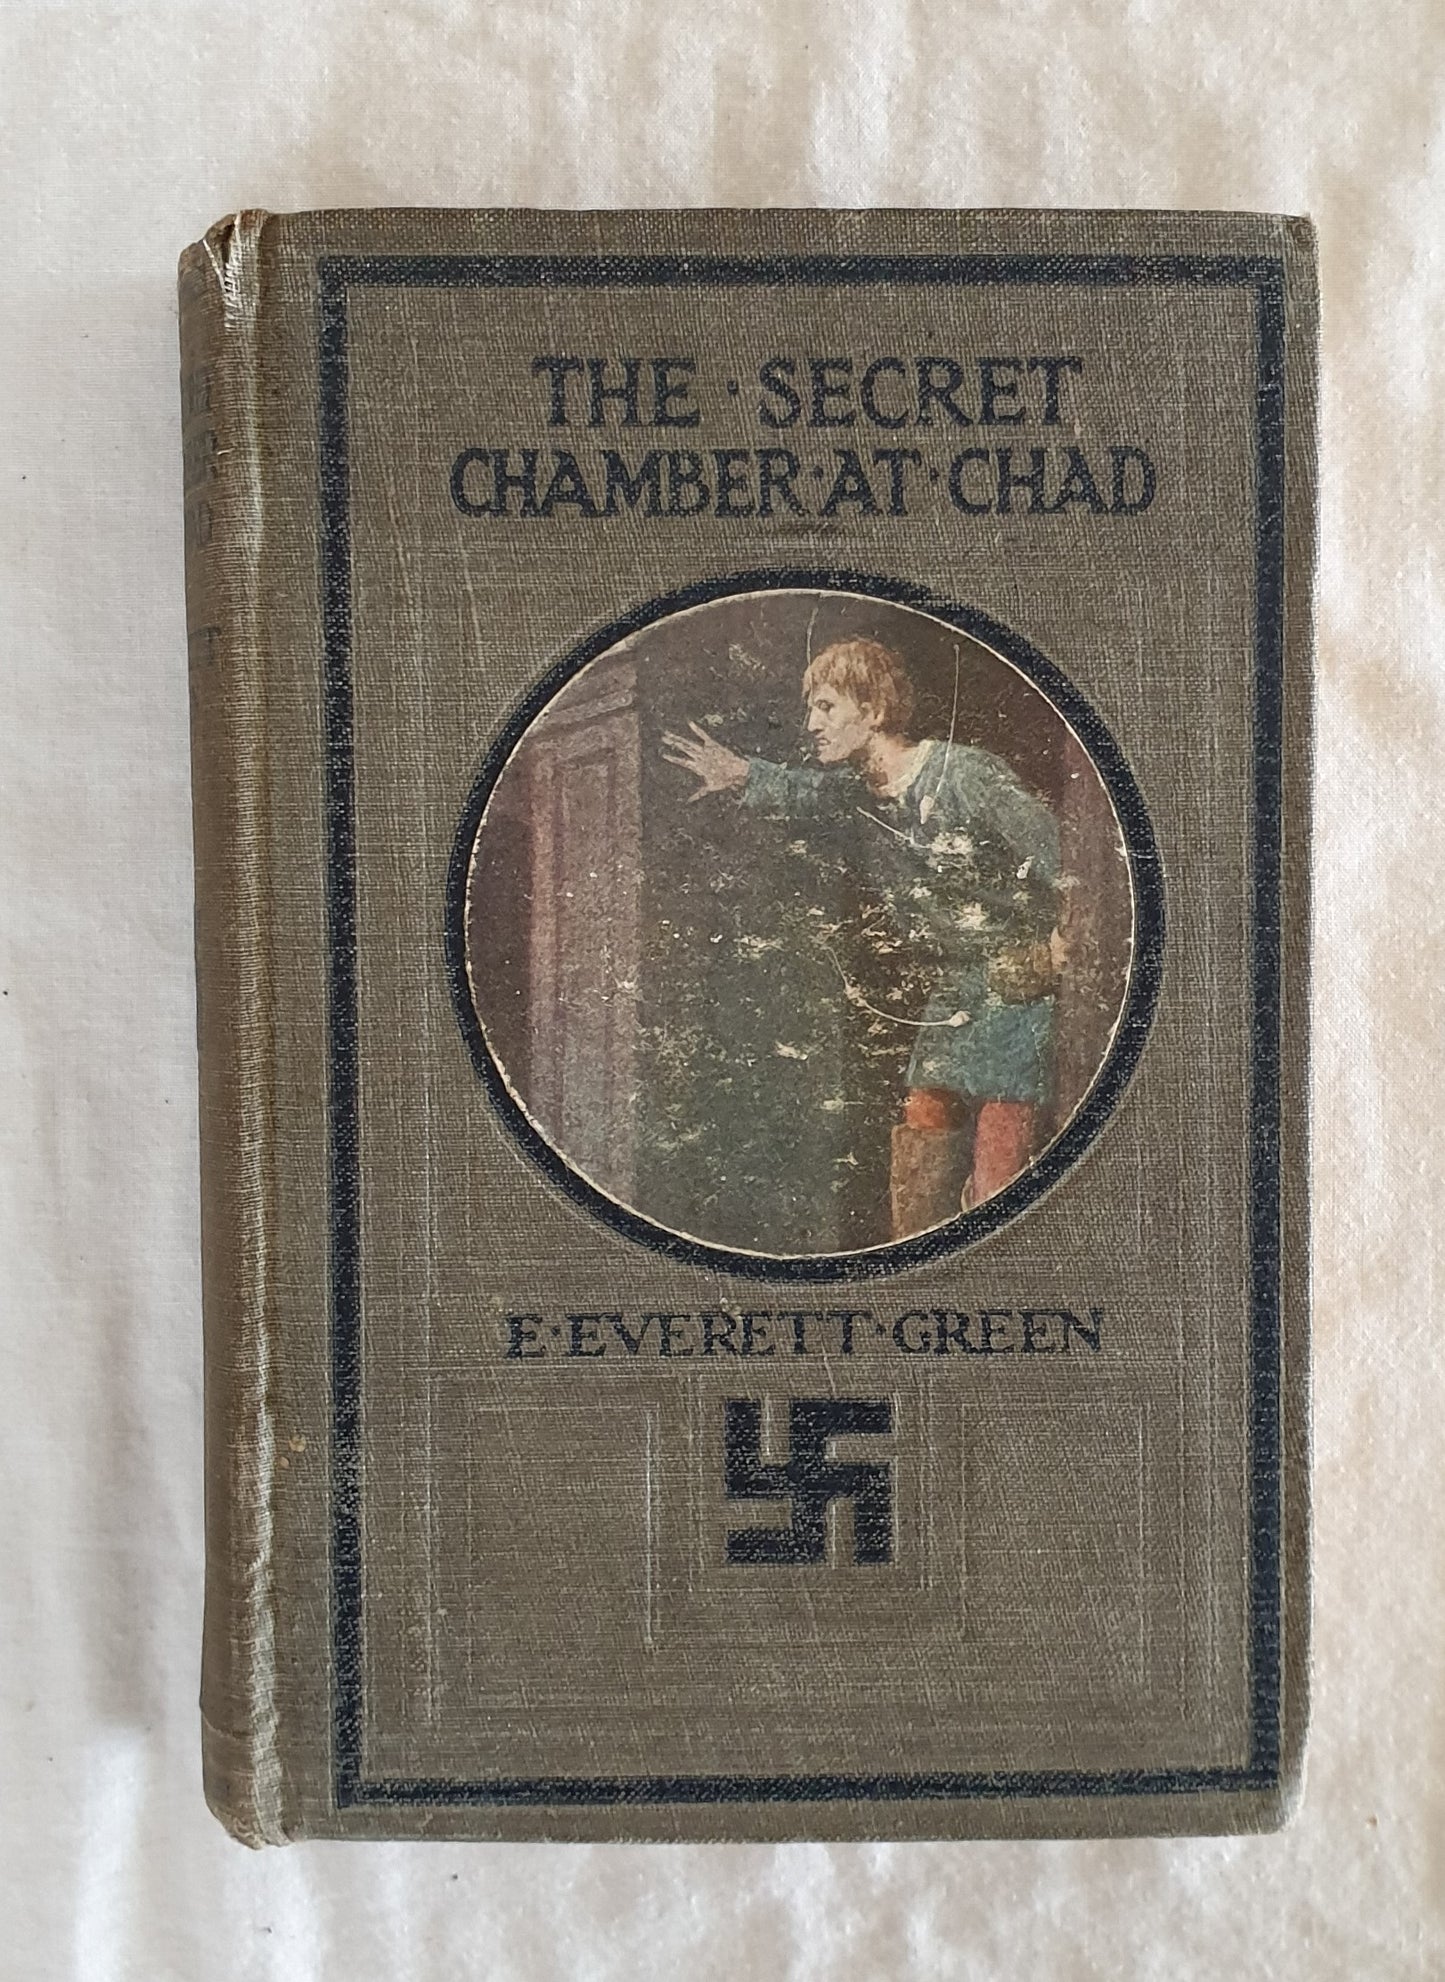 The Secret Chamber At Chad  by E. Everett Green